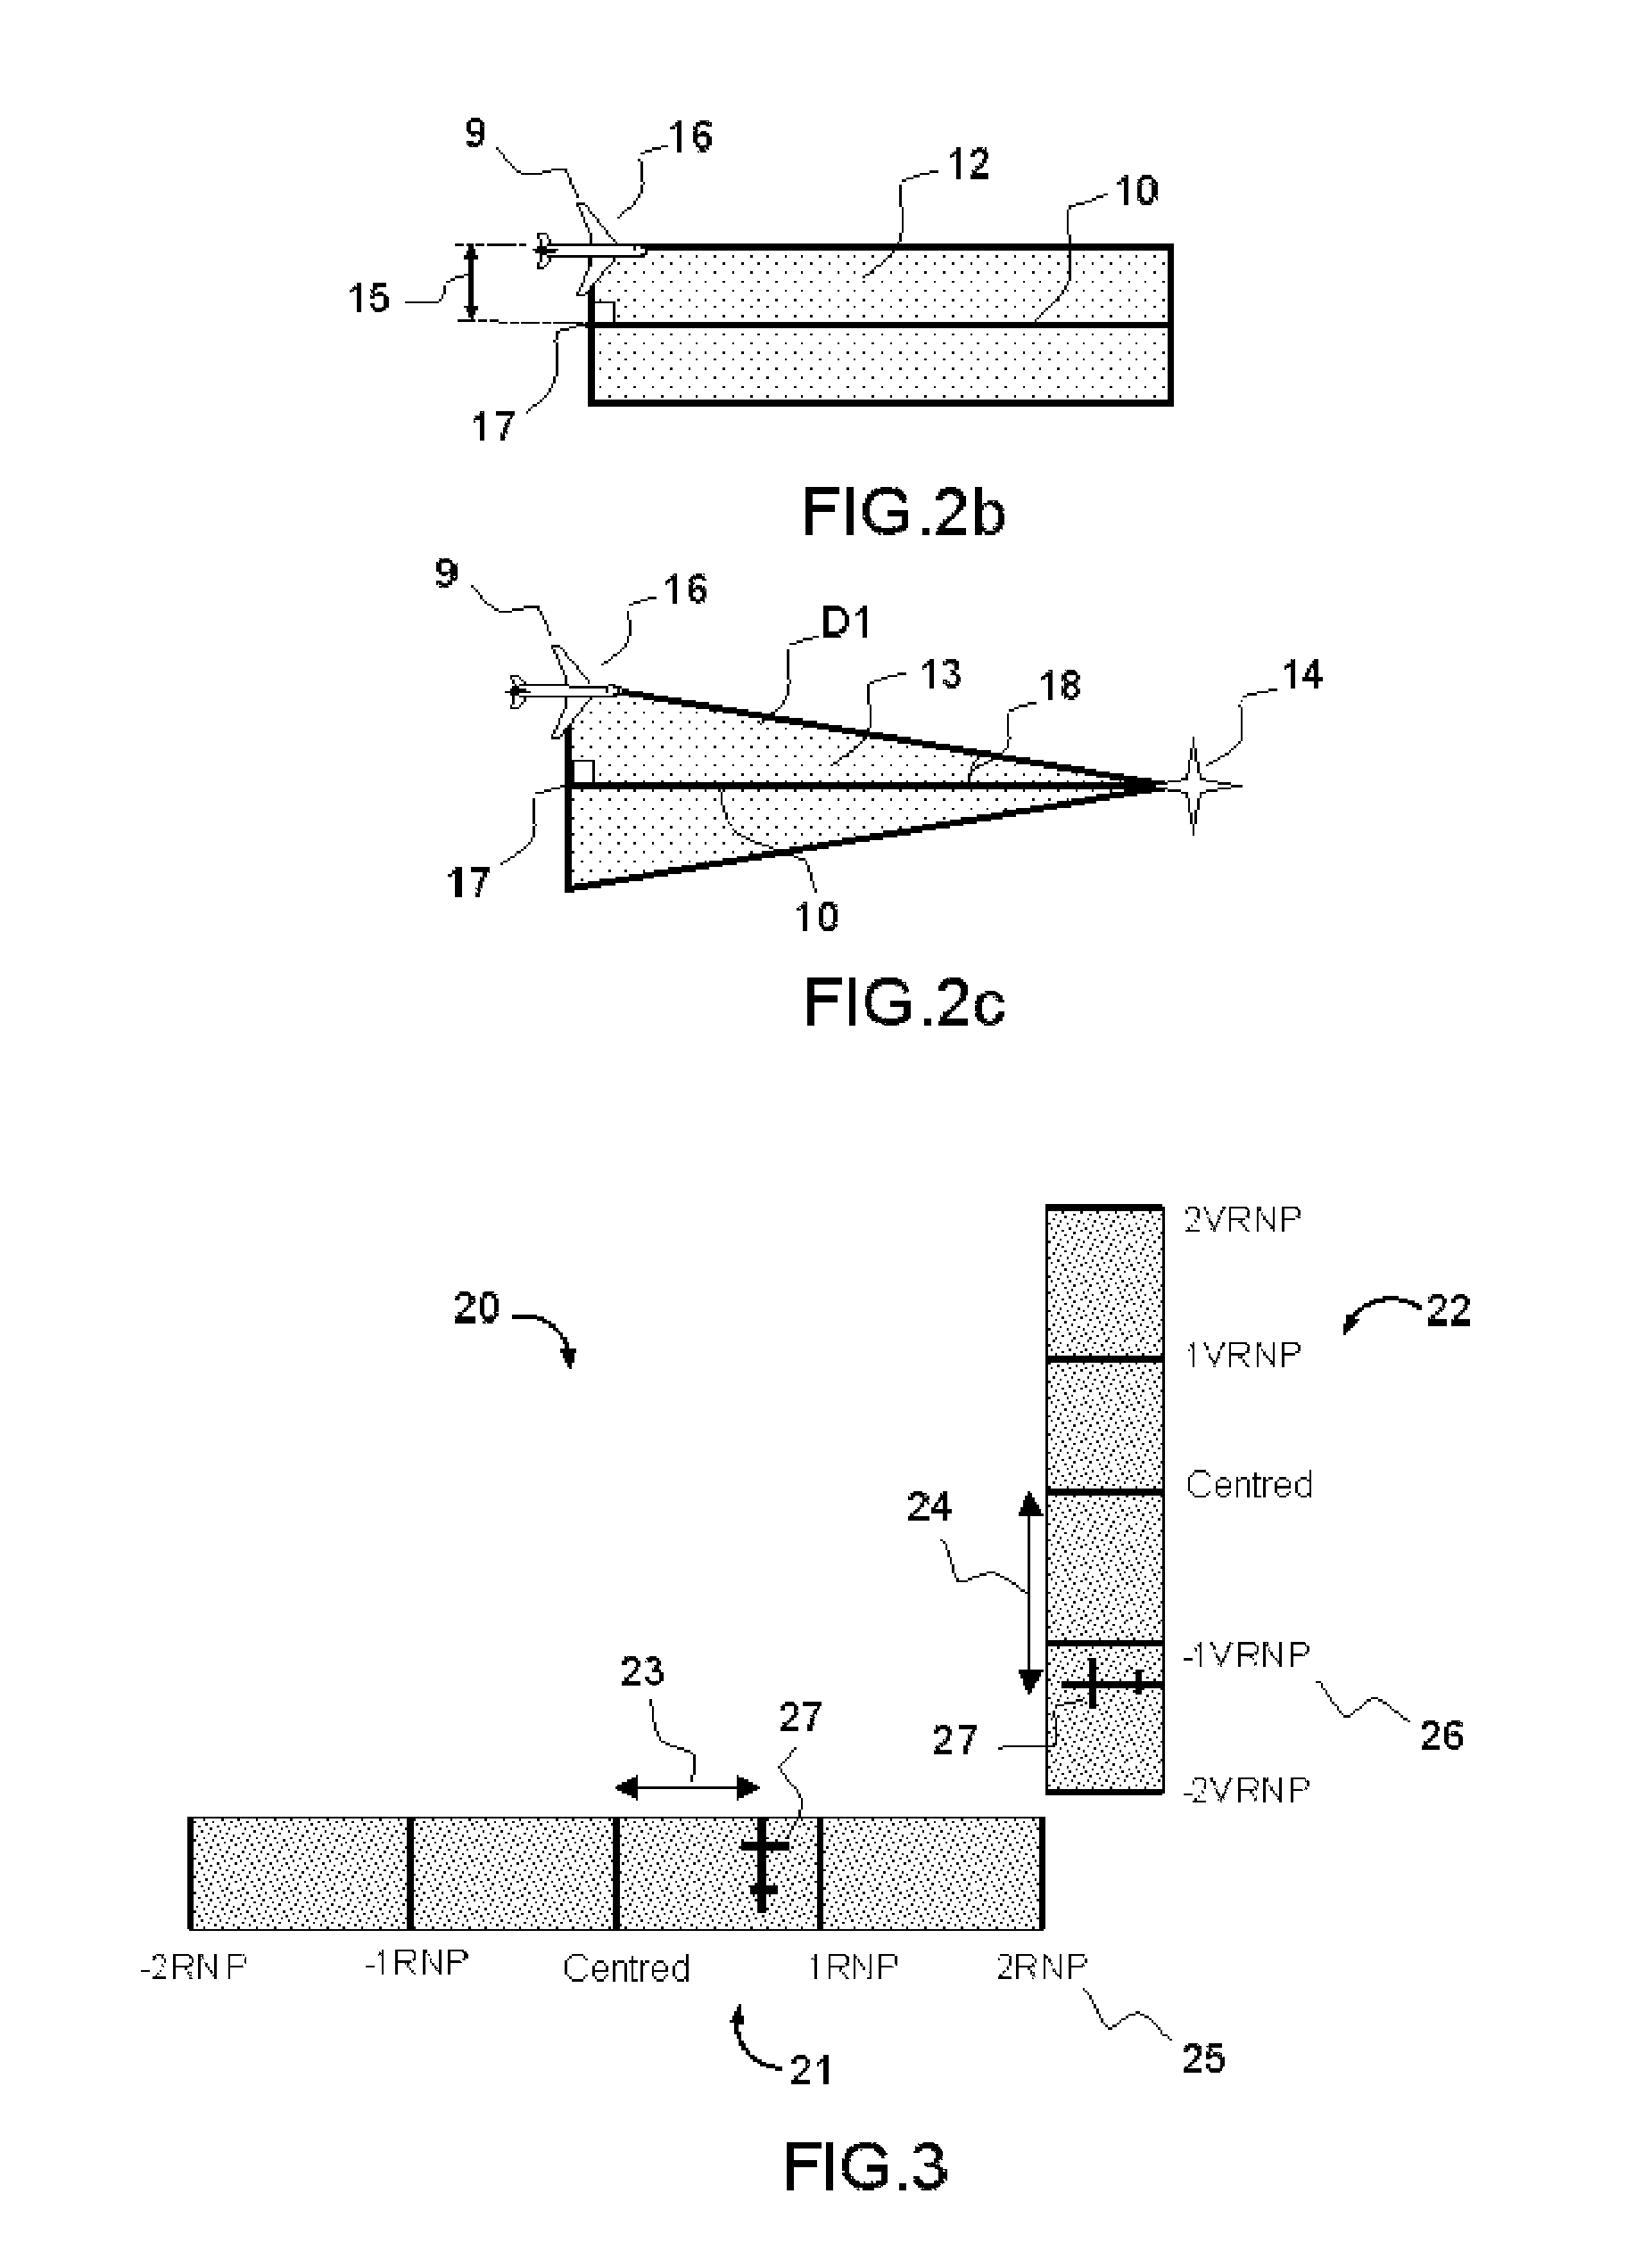 Navigation assistance method based on anticipation of linear or angular deviations